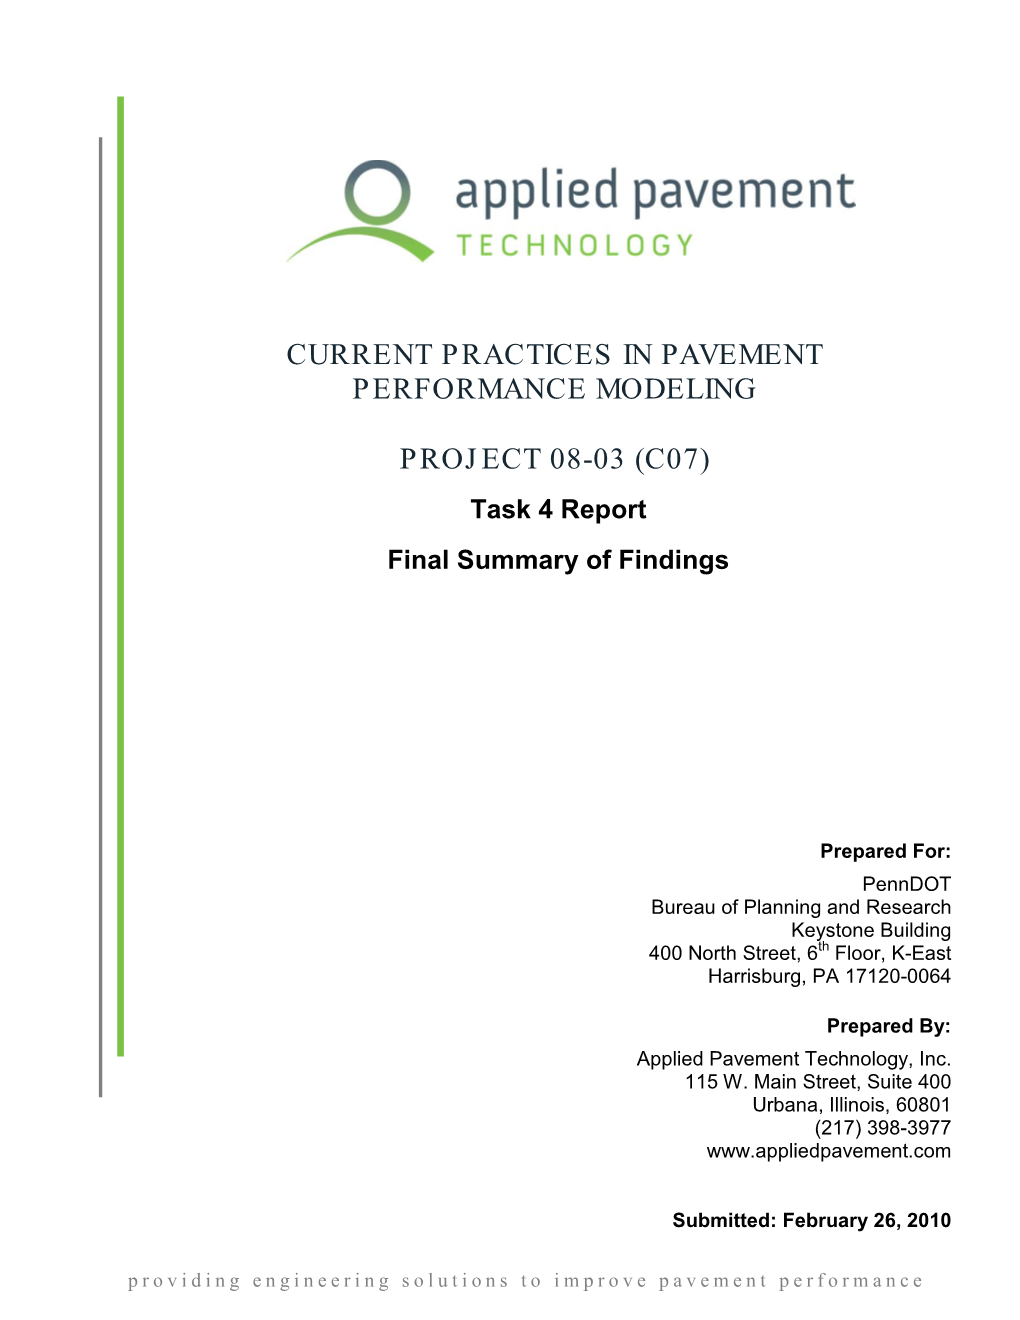 Research of Current Practices in Pavement Performance Modeling 6